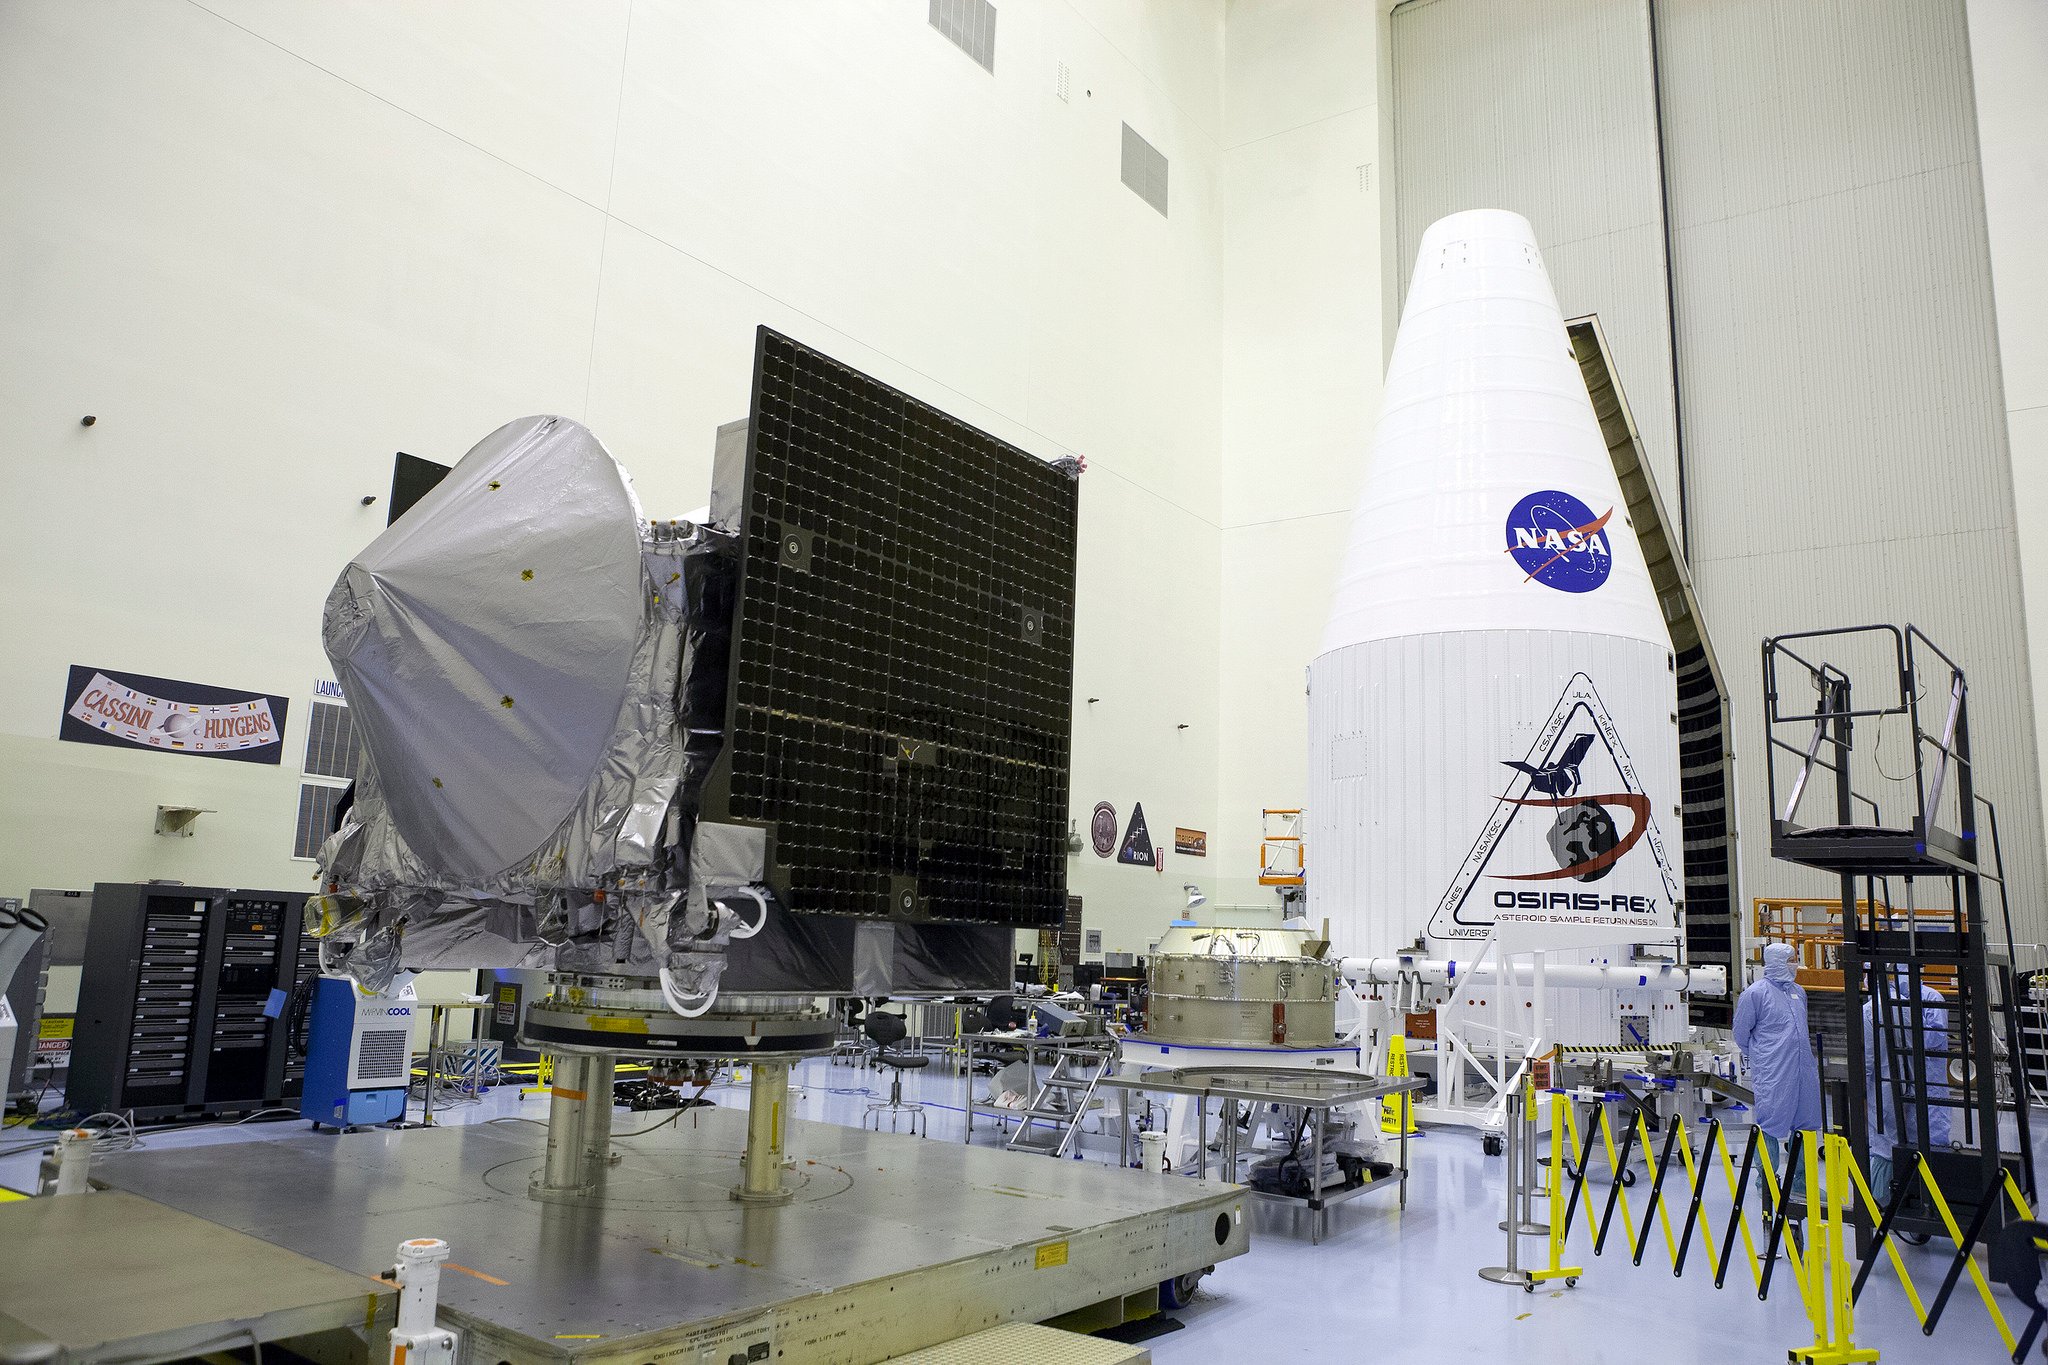 OSIRIS-REx sits on the floor of the Payload Hazardous Servicing Facility at NASA’s Kennedy Space Center next to the payload fairing that will protect it during its launch atop an Atlas V rocket. Source: NASA/Glenn Benson